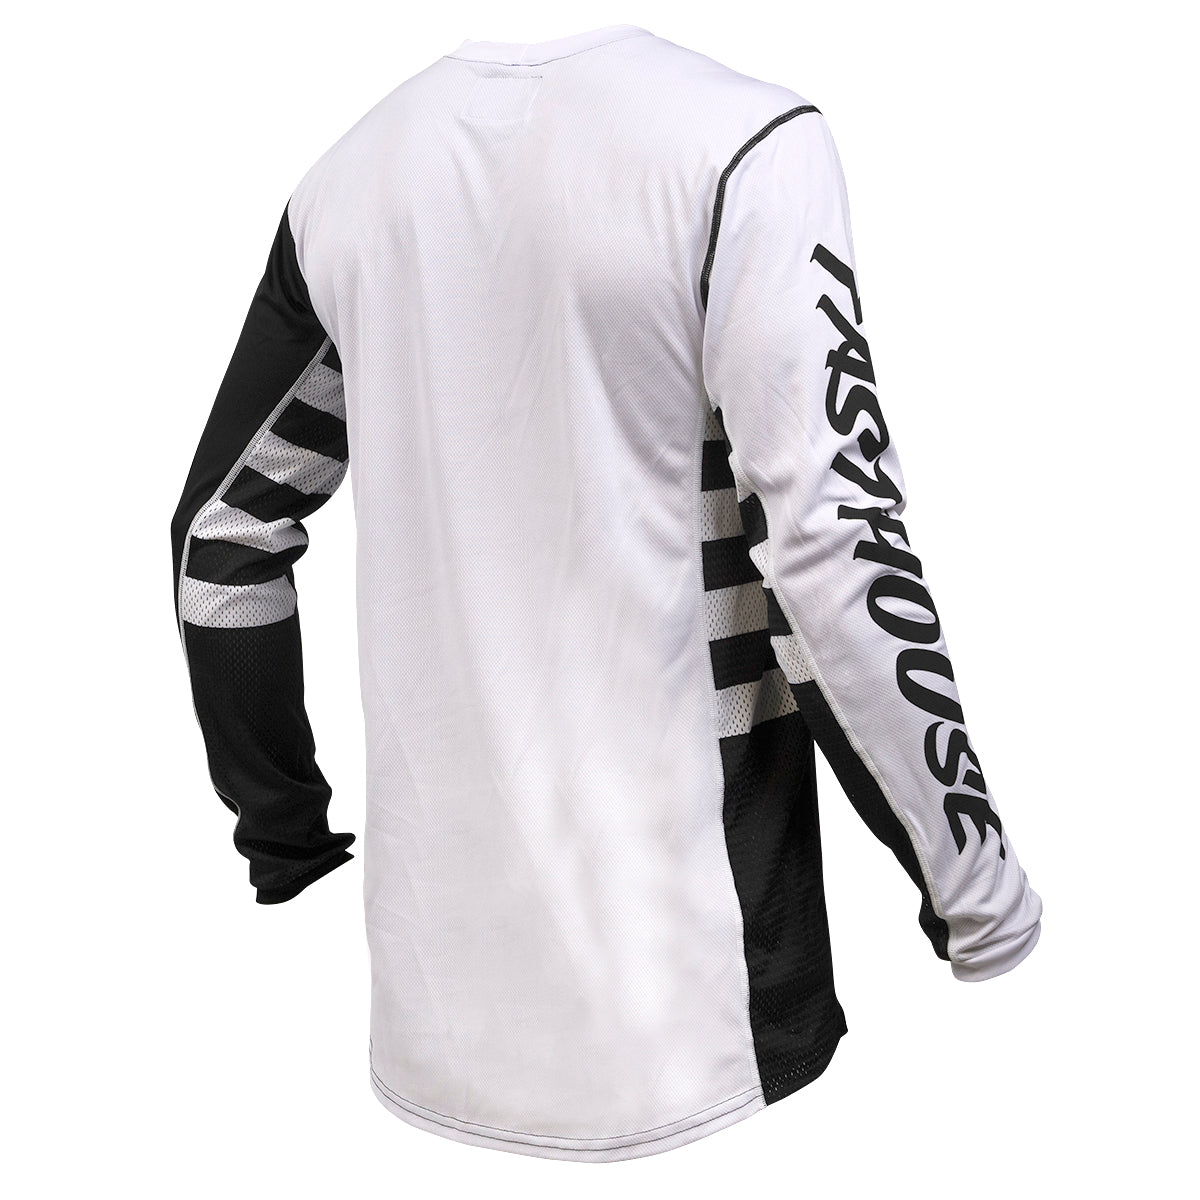 Fasthouse Off-Road Jersey - Black/White L